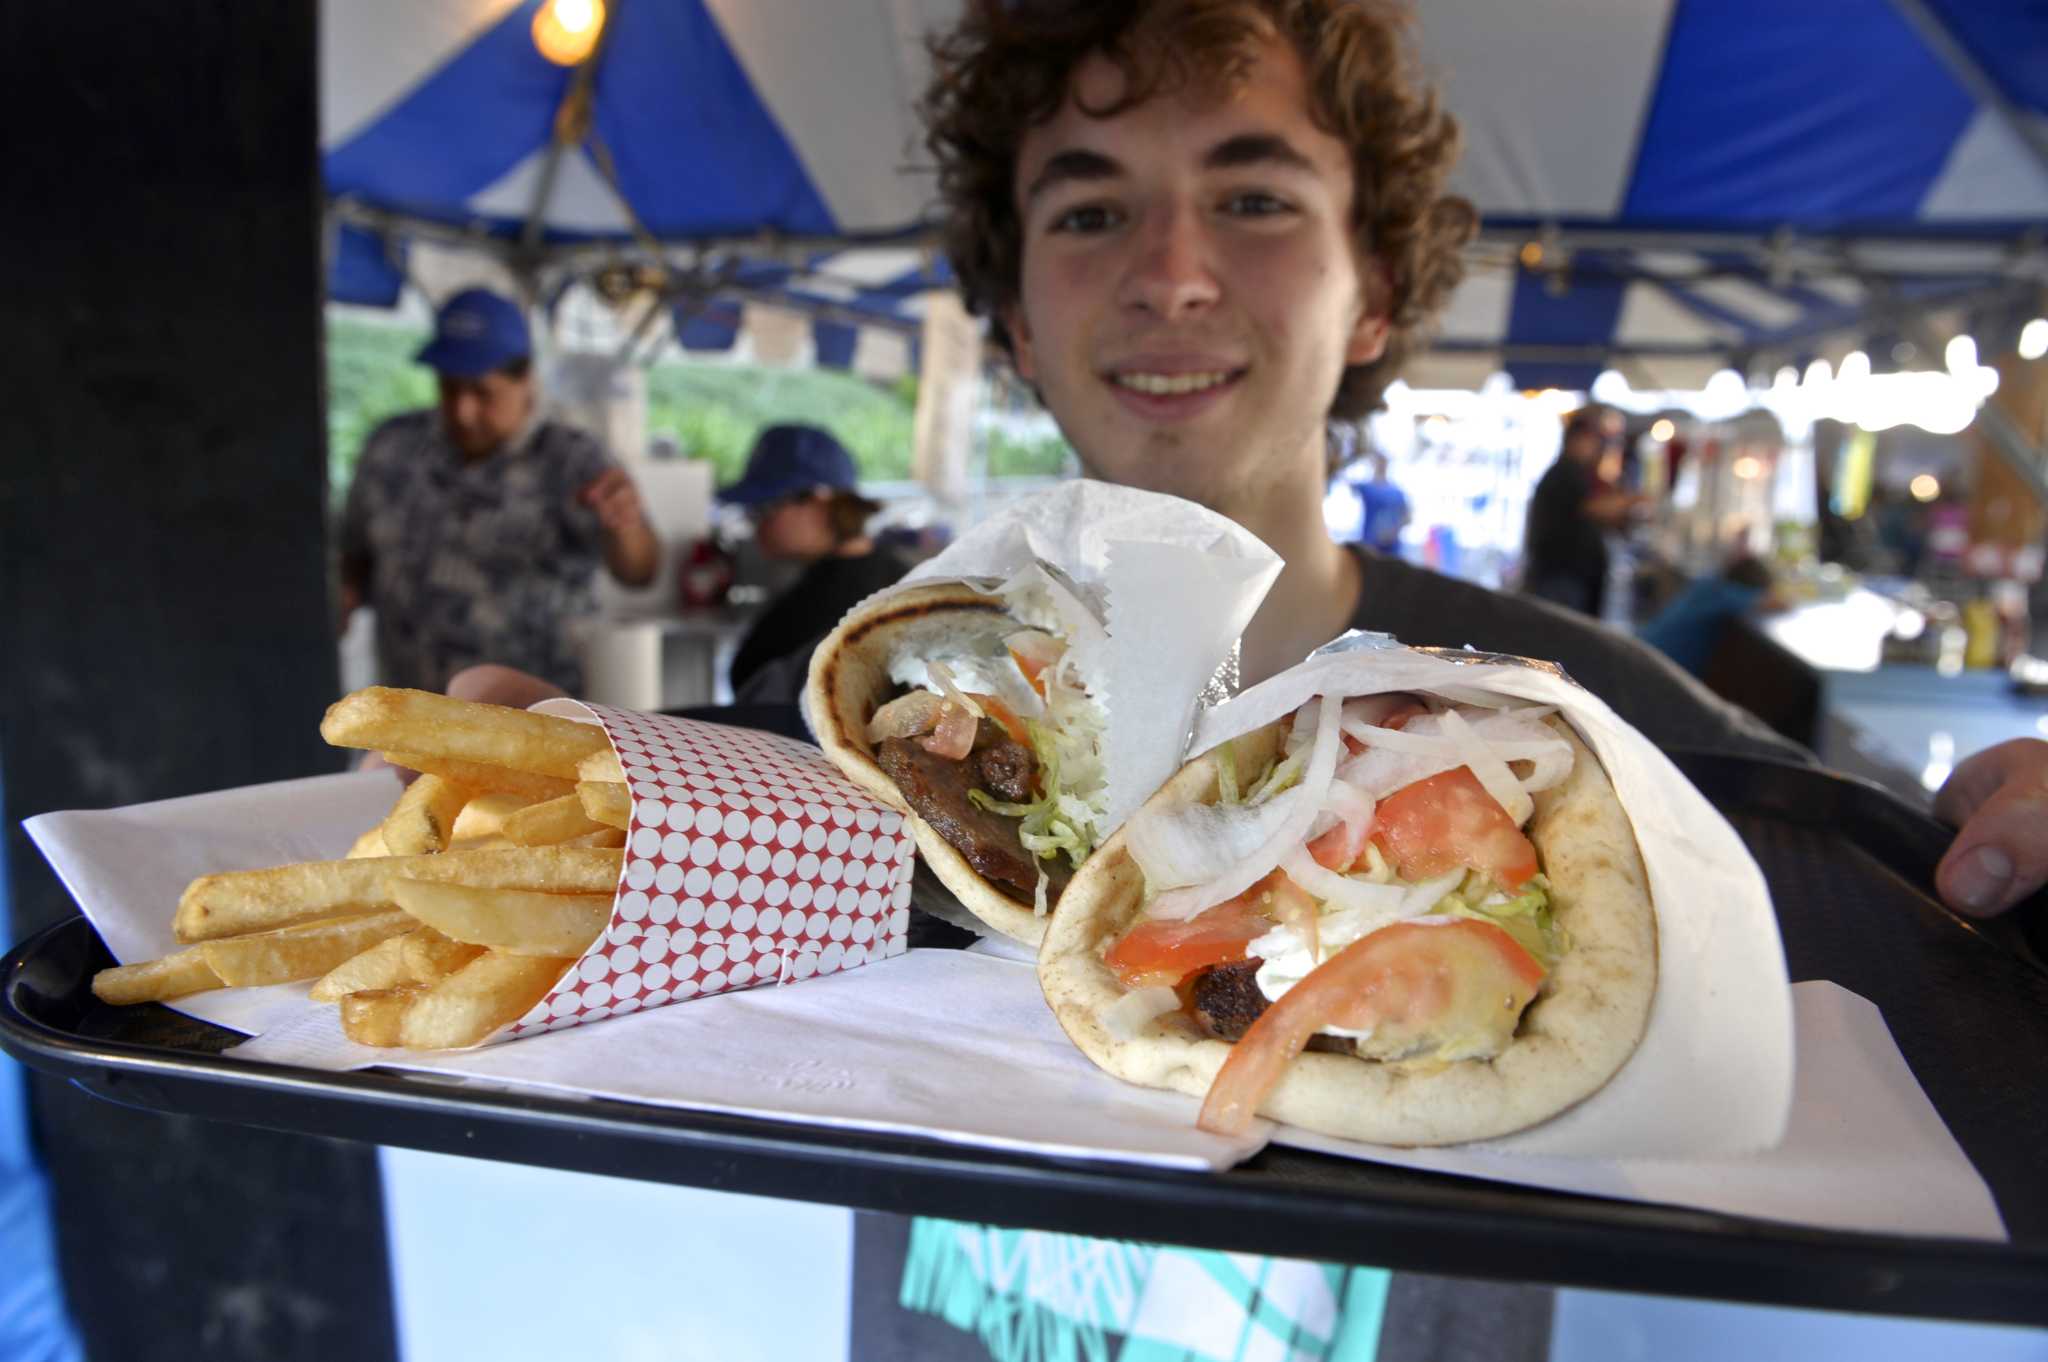 Danbury Greek Festival to return in 2022, takeout available this weekend